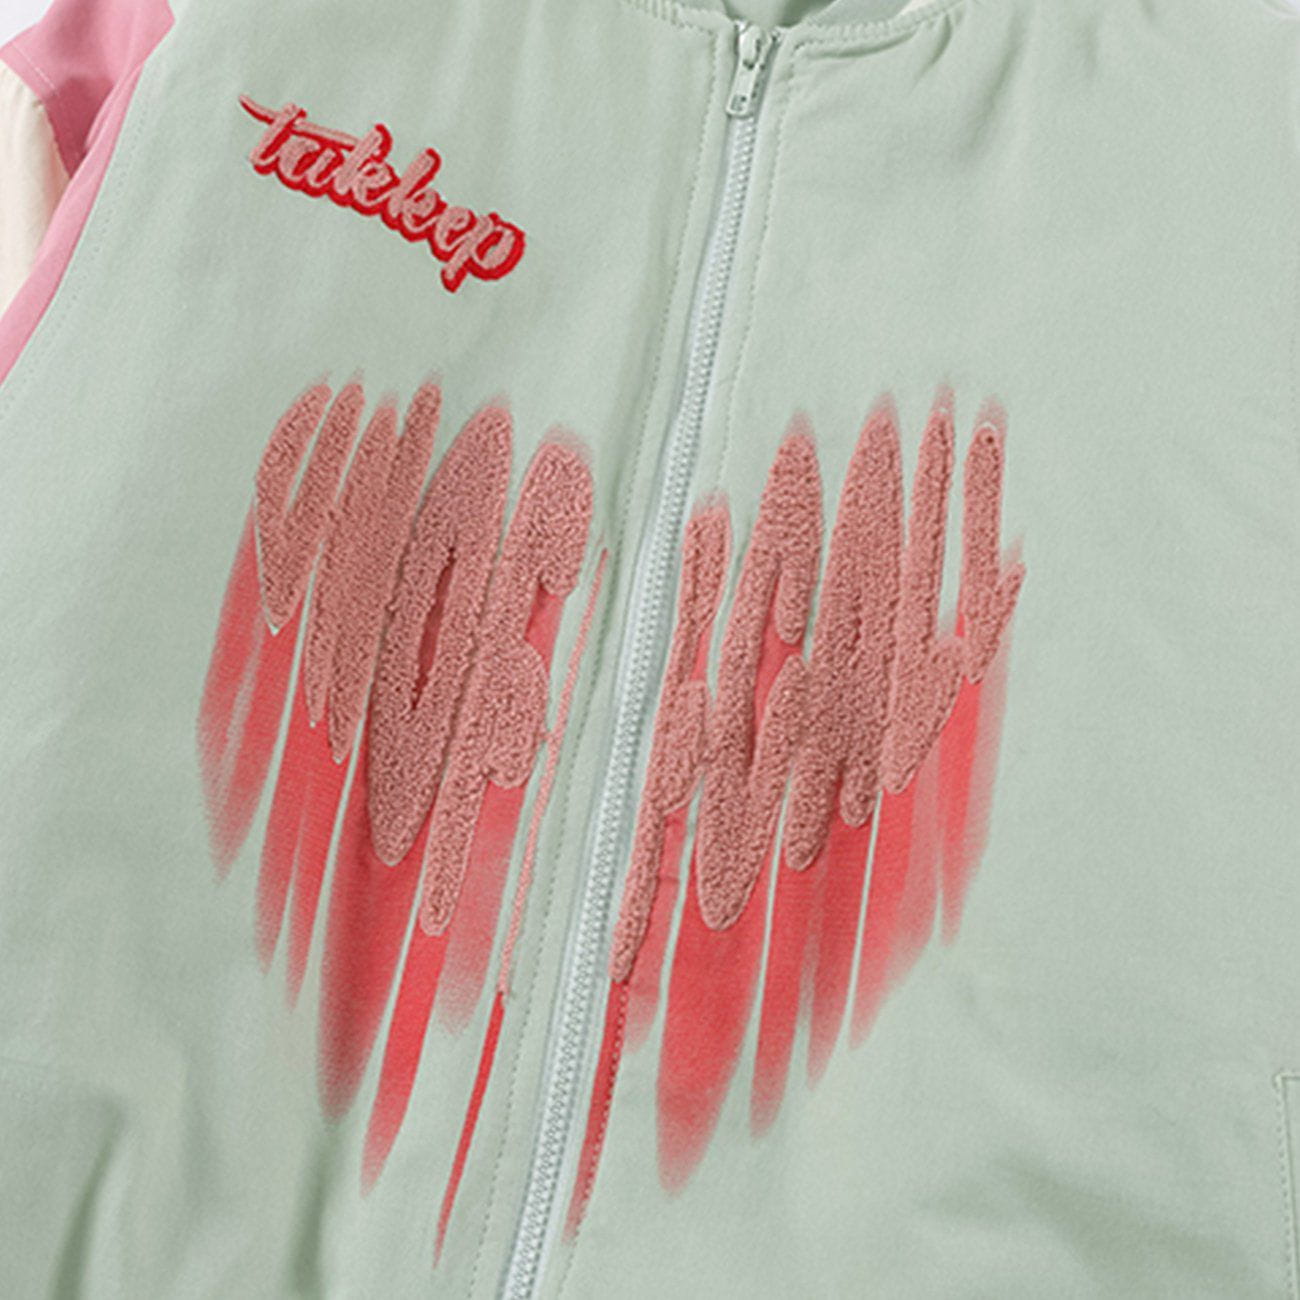 Eprezzy® - Towel Embroidered Heart-shaped Letters Winter Coat Streetwear Fashion - eprezzy.com